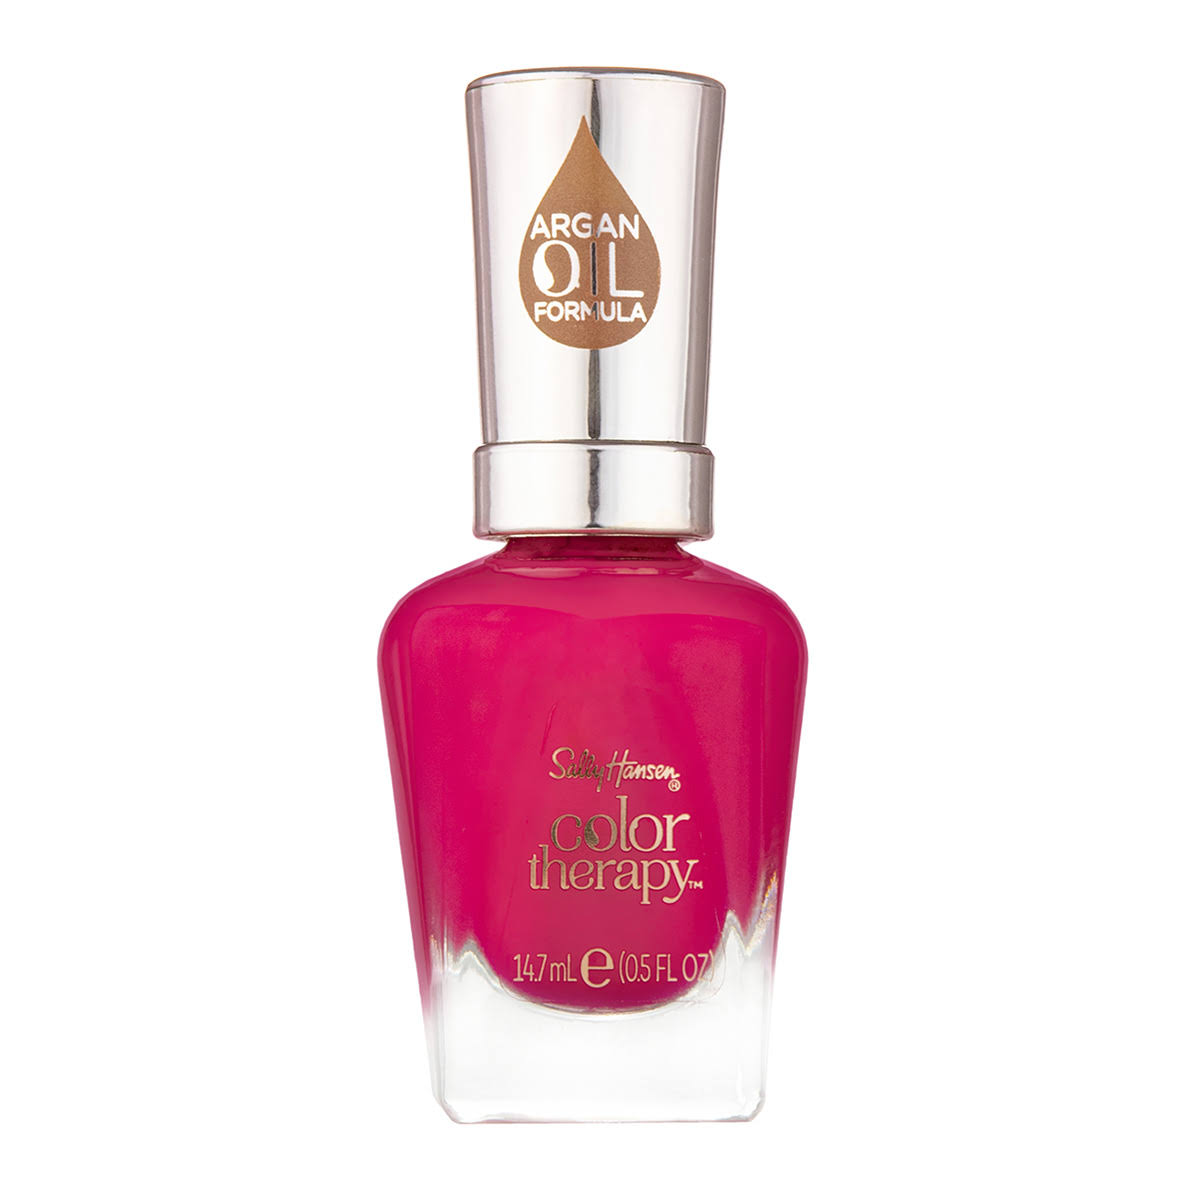 Sally Hansen Color Therapy Nail Colour - 290 Pampered in Pink, 14.7ml